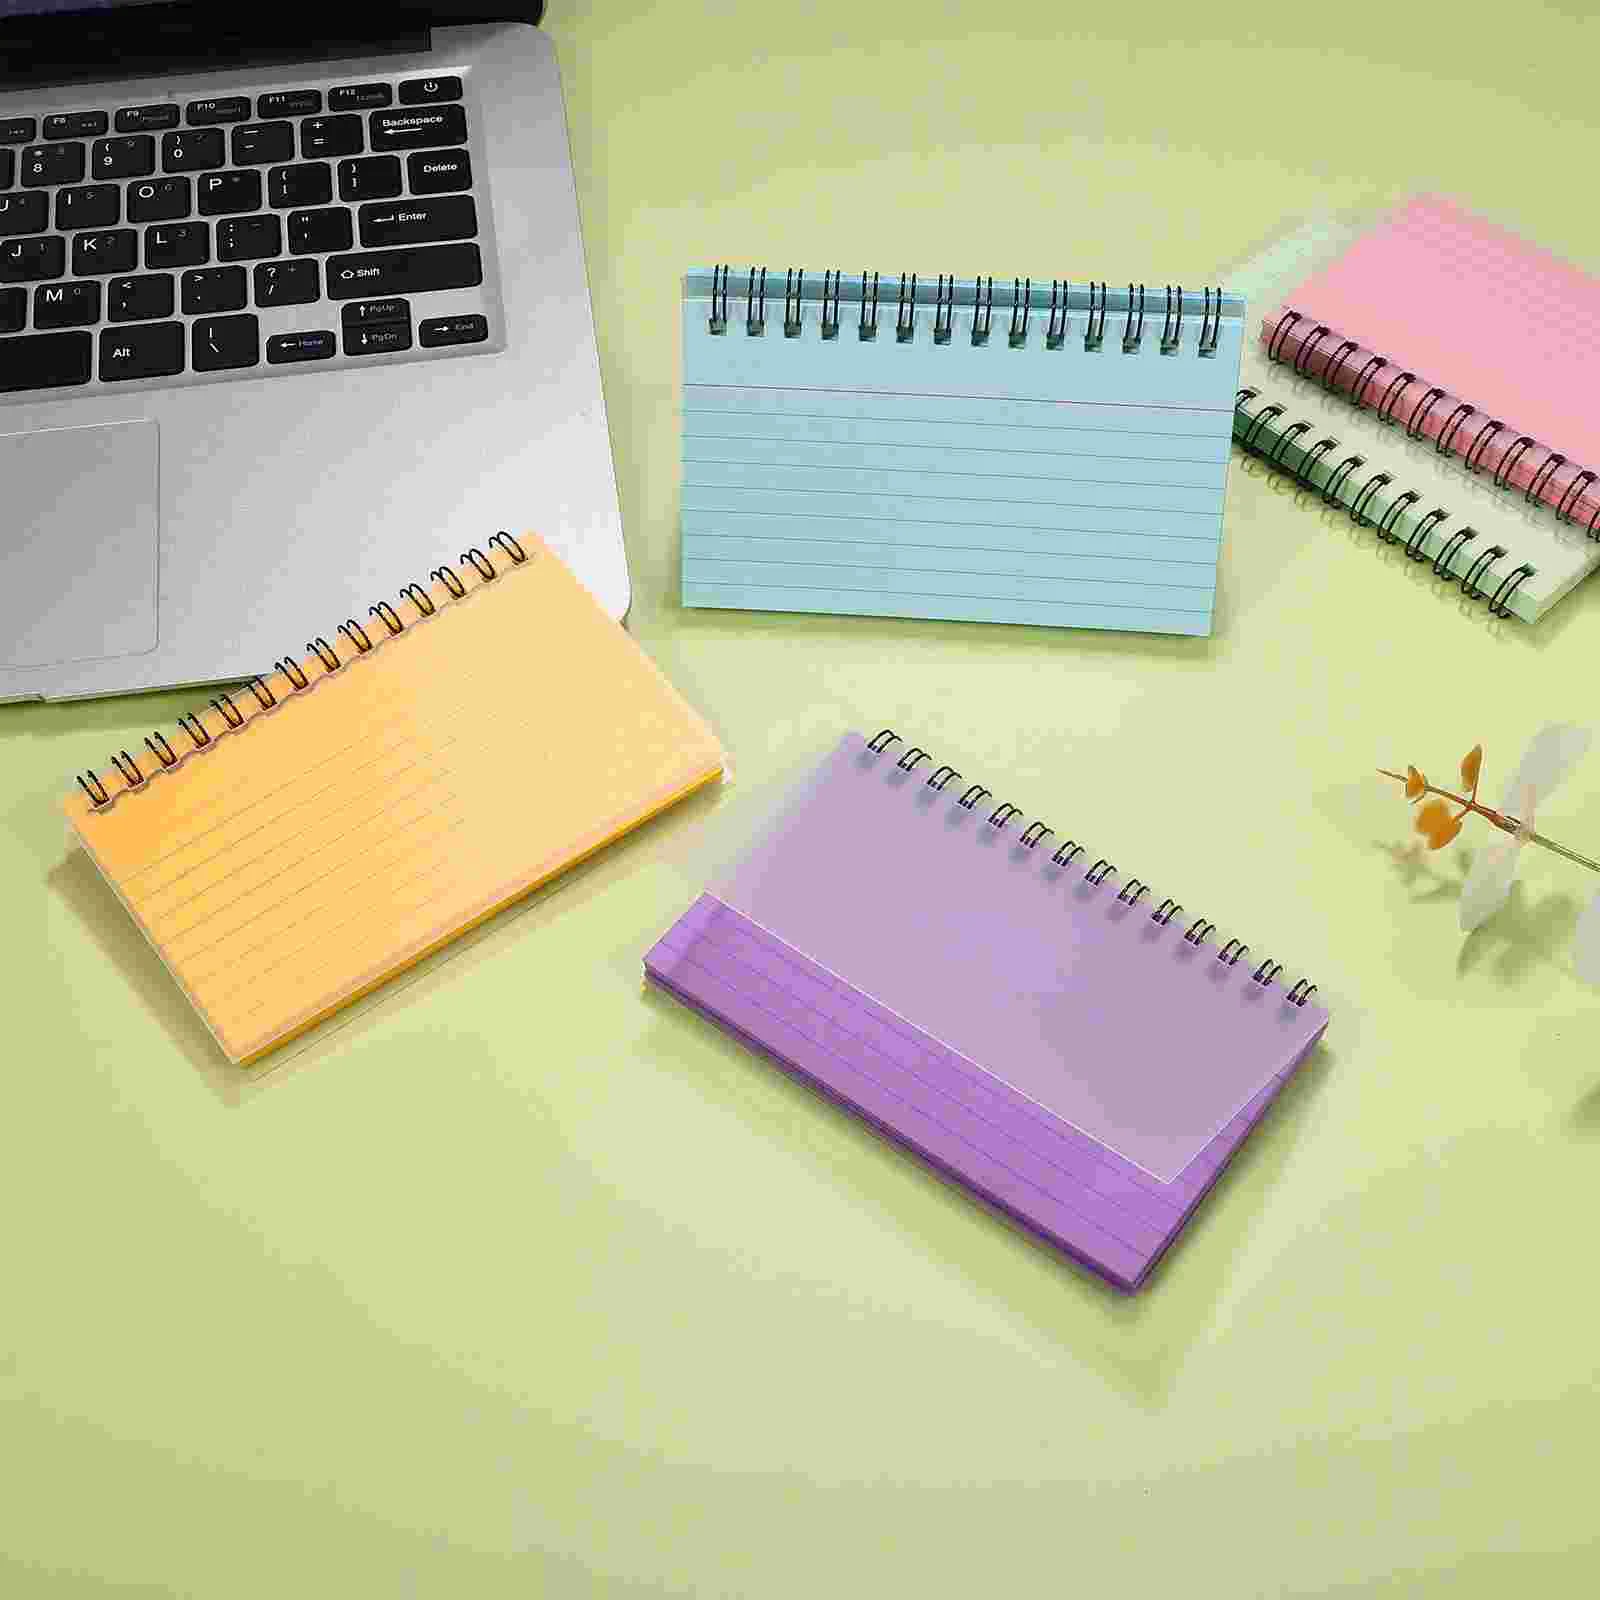 

5 Pcs Notebook Meeting Notebooks Index Papers Binder Card Cards Record Notepad Small Student Colored Flash